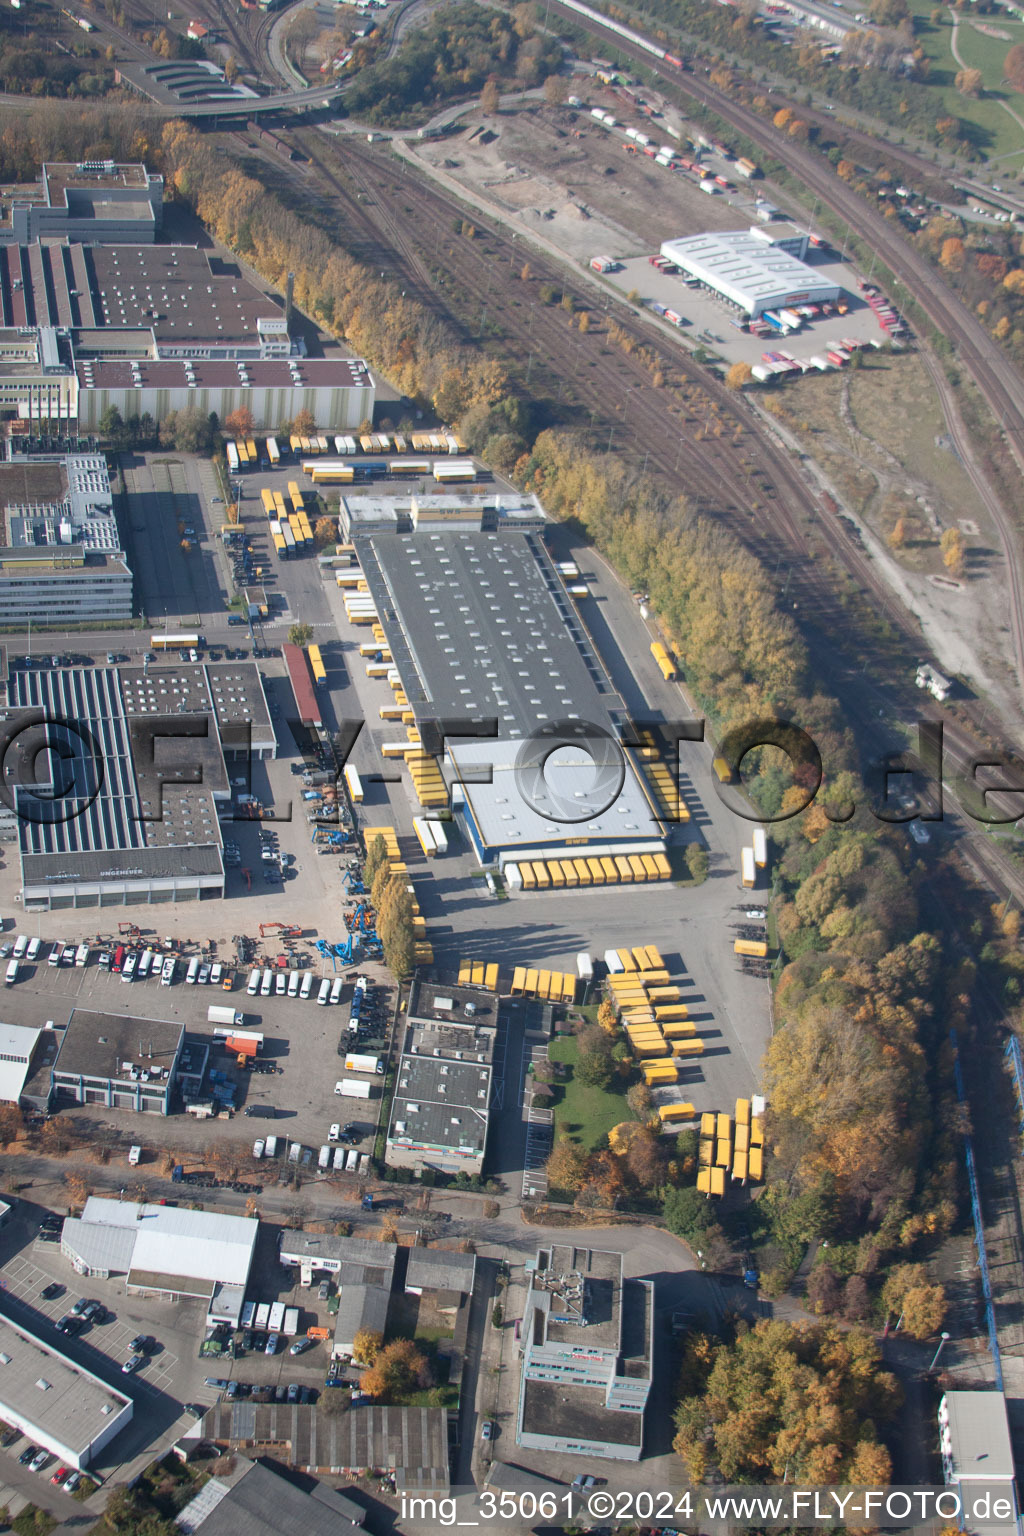 Drone recording of Warehouses and forwarding building SWS-Speditions-GmbH, Otto-street in the district Durlach in Karlsruhe in the state Baden-Wurttemberg